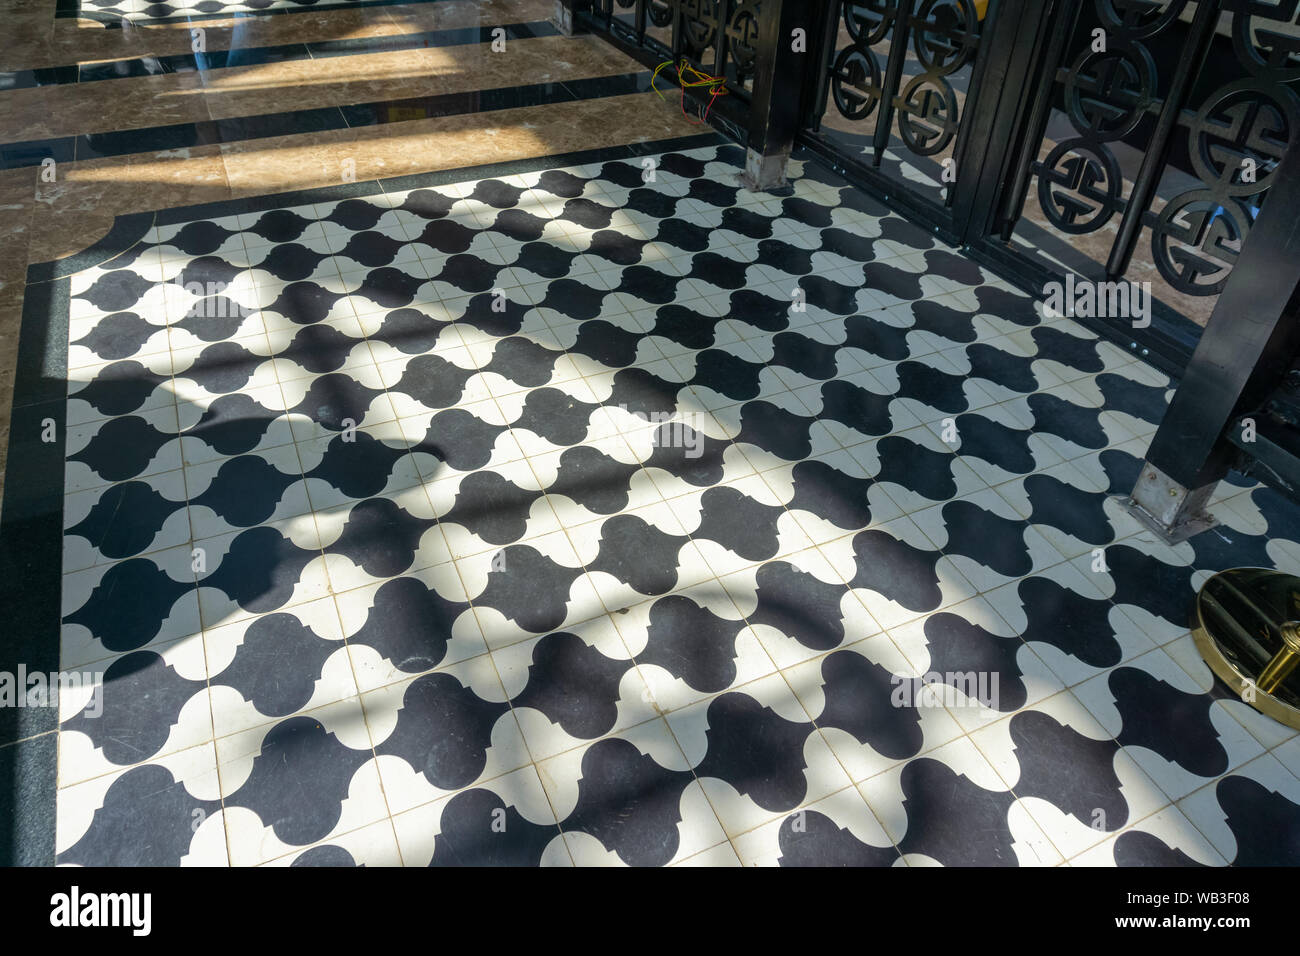 Black And White Checkered Floor Grunge Tiles Marble Surface At